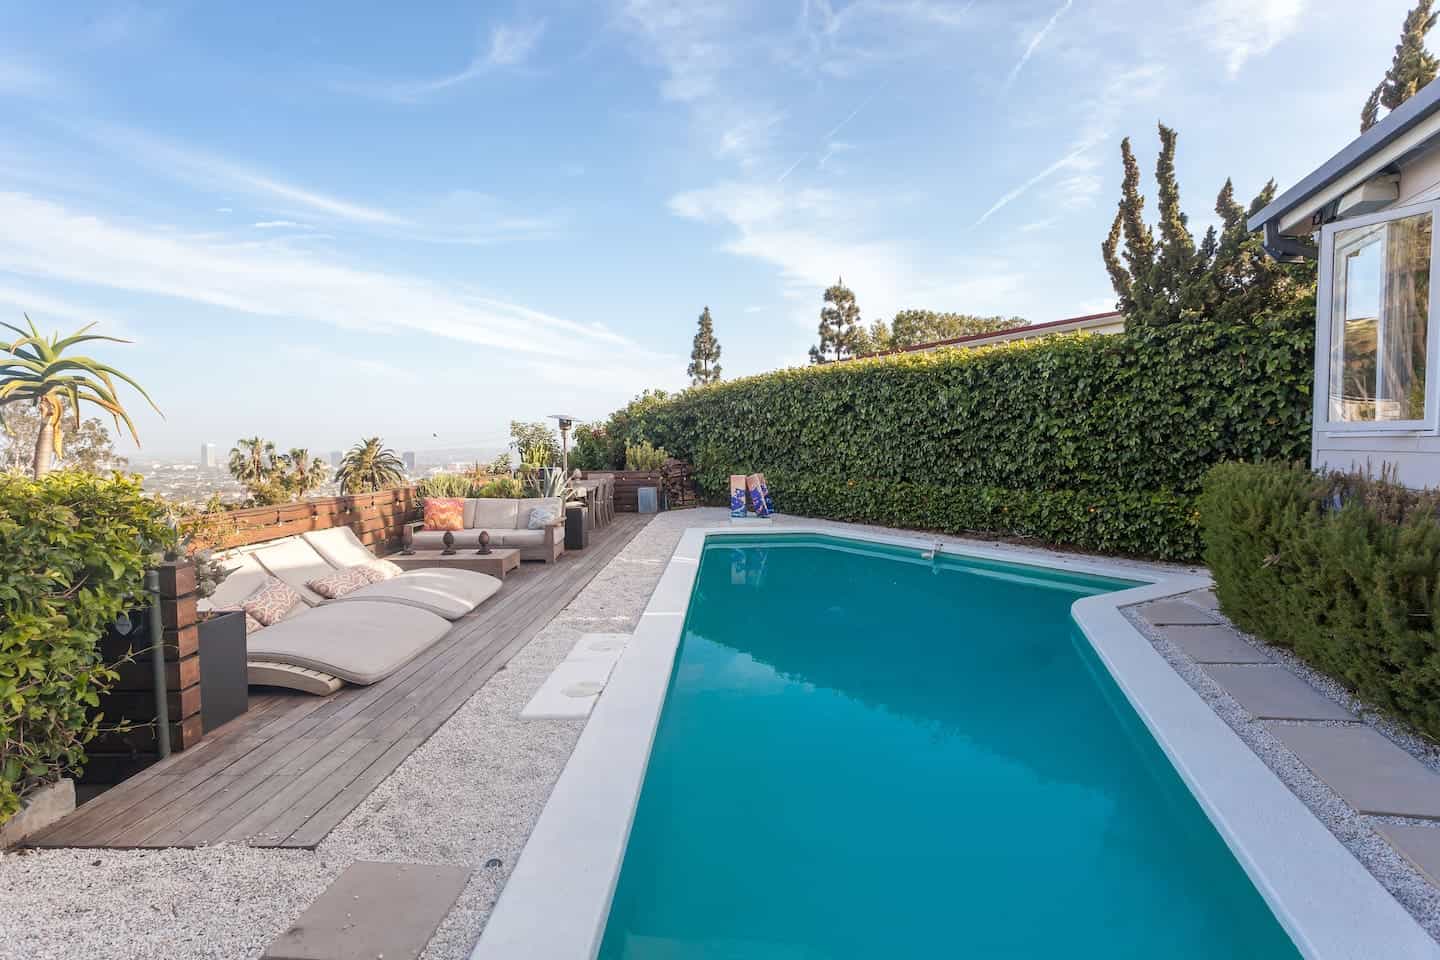 Image of Airbnb rental in West Hollywood, CA